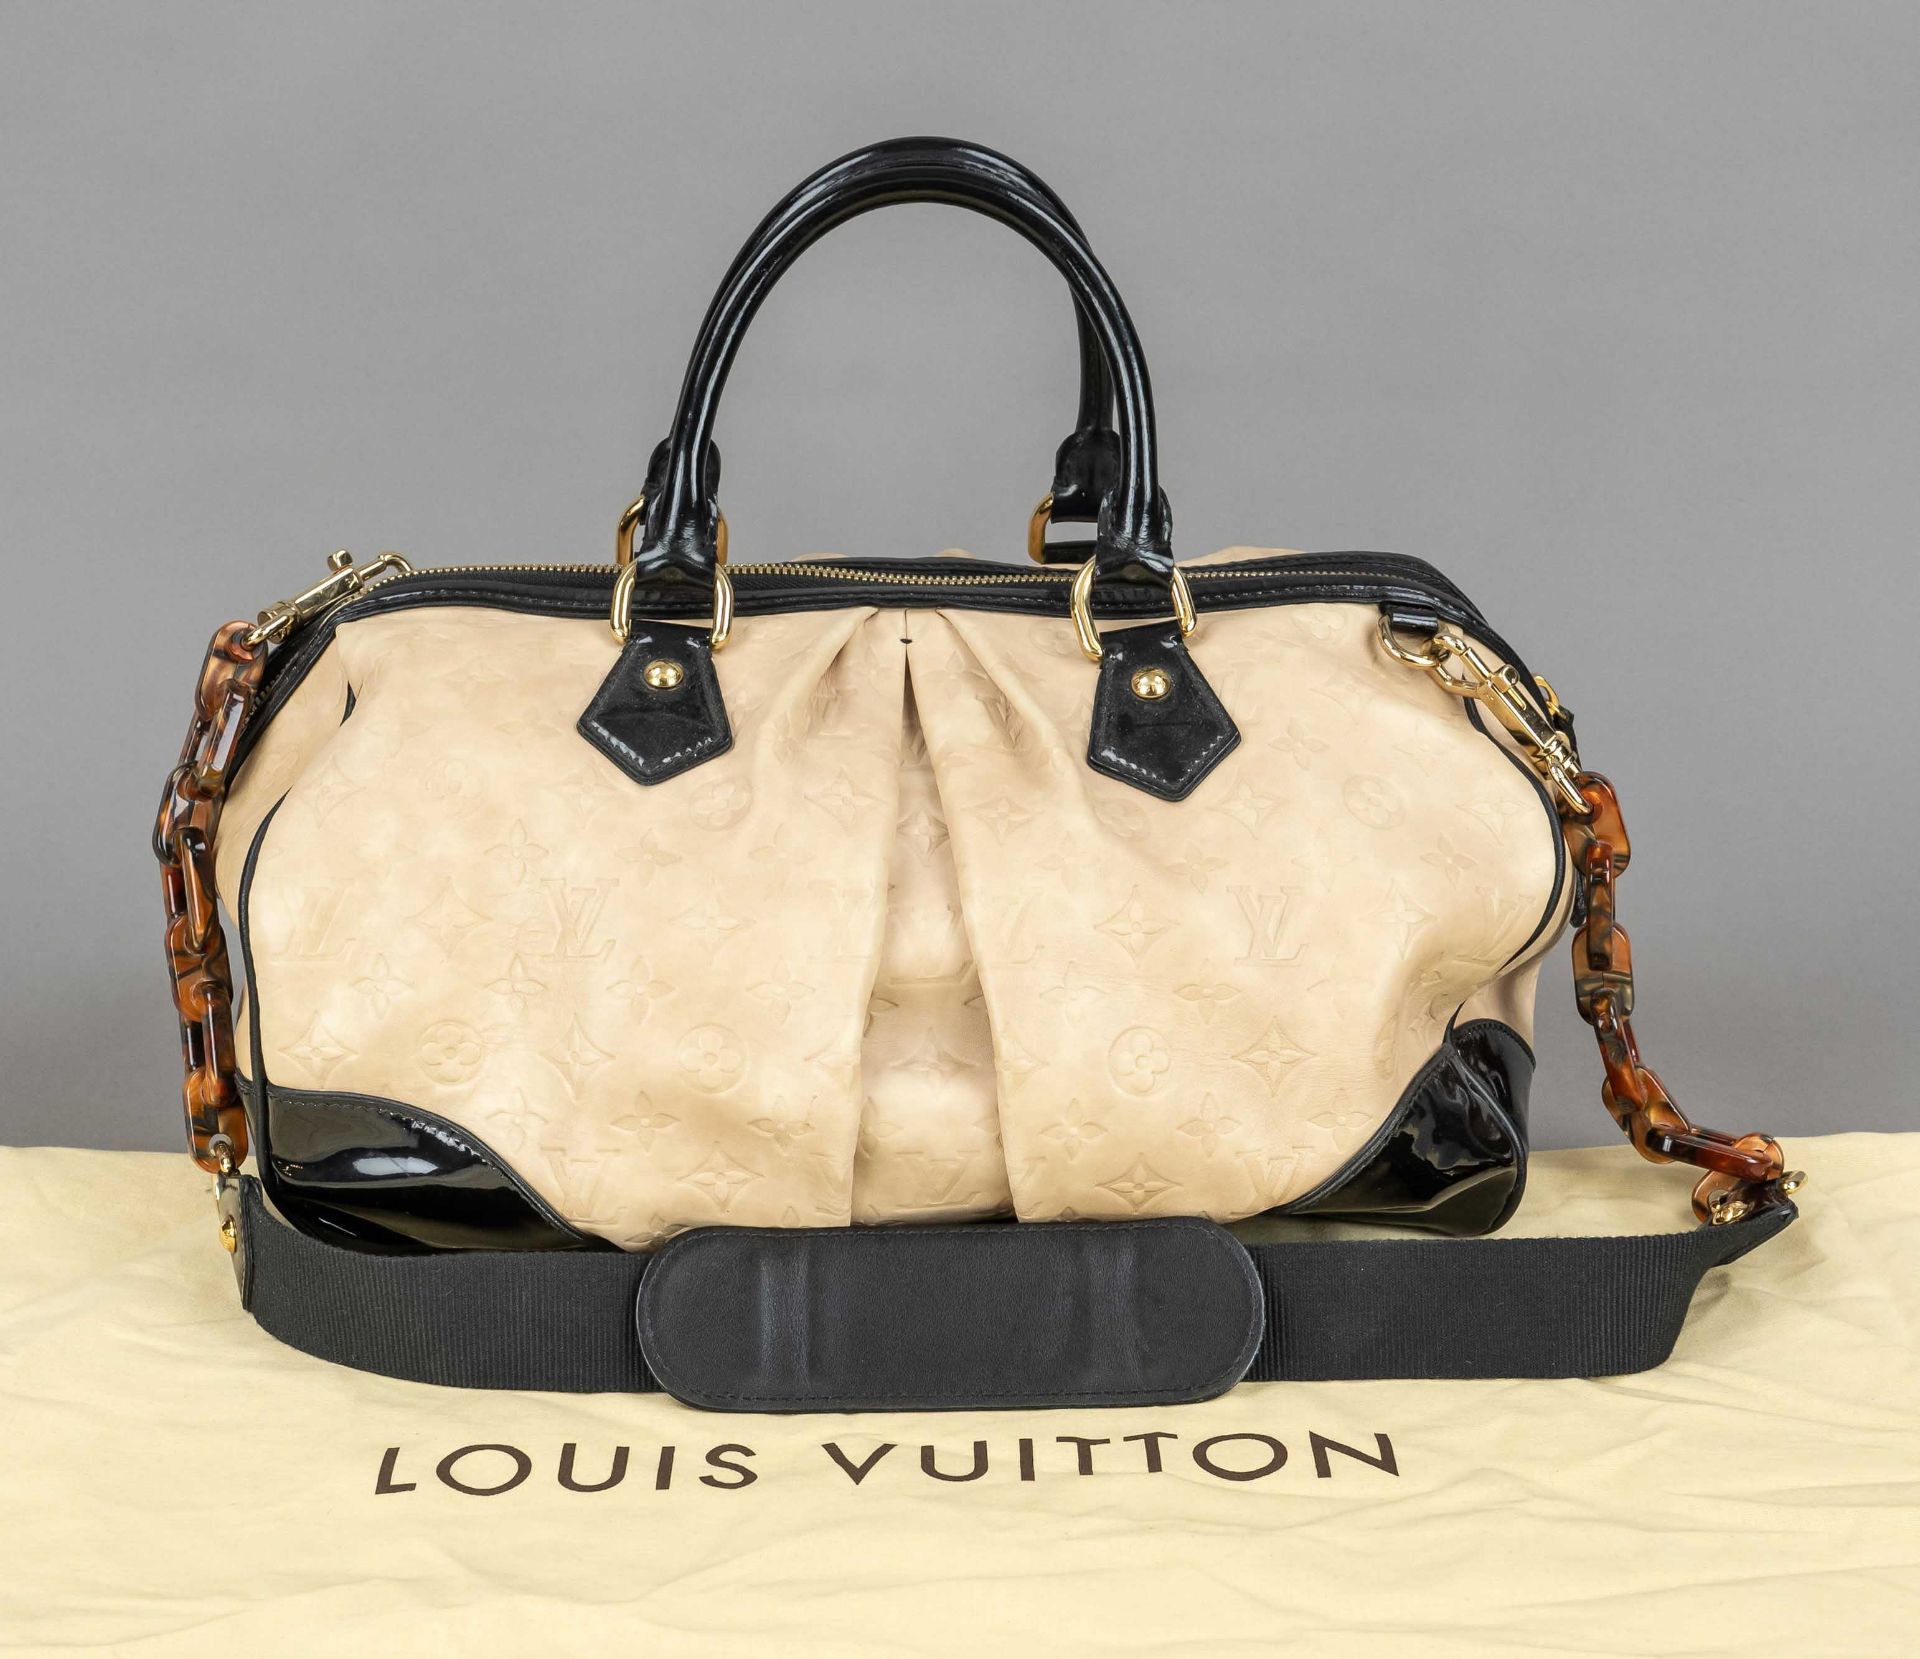 Louis Vuitton, Limited Edition Ivory Embossed Monogram Stephen Bag, embossed sand-colored calfskin